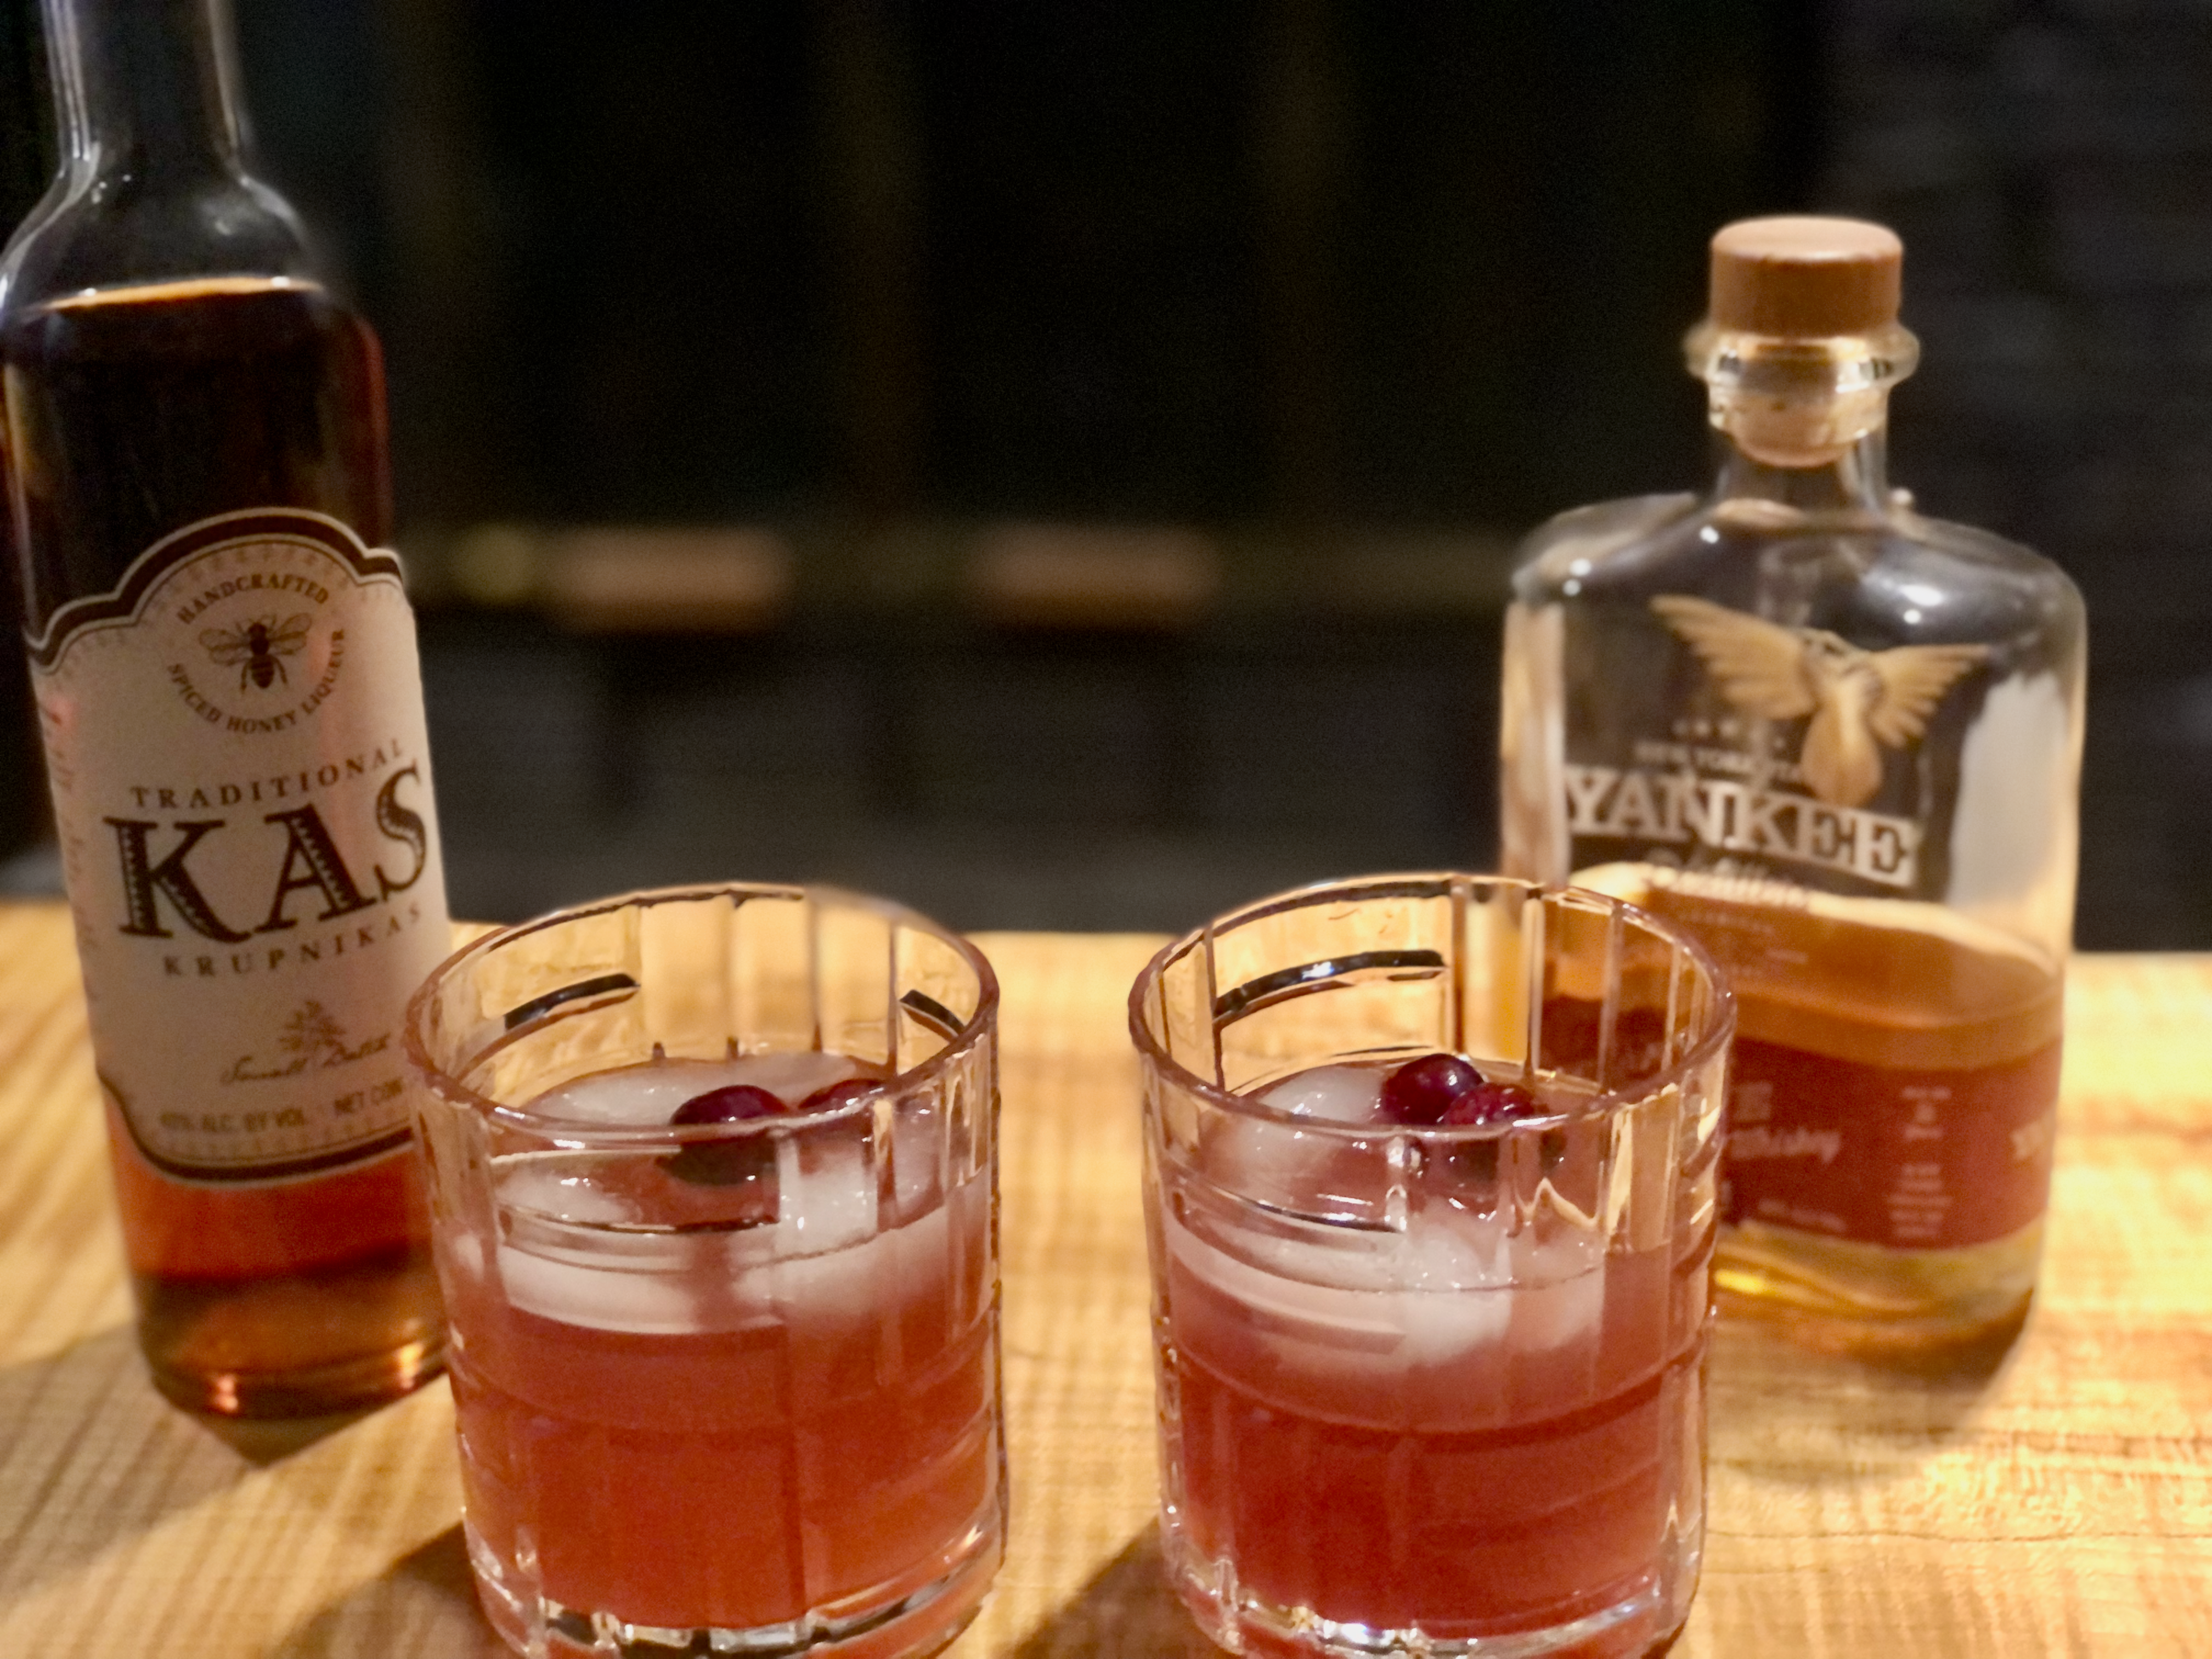 Immune boosting cranberry and pine shrub cocktails in front of Kas honey liquor and Yankee Distillers whiskey bottles